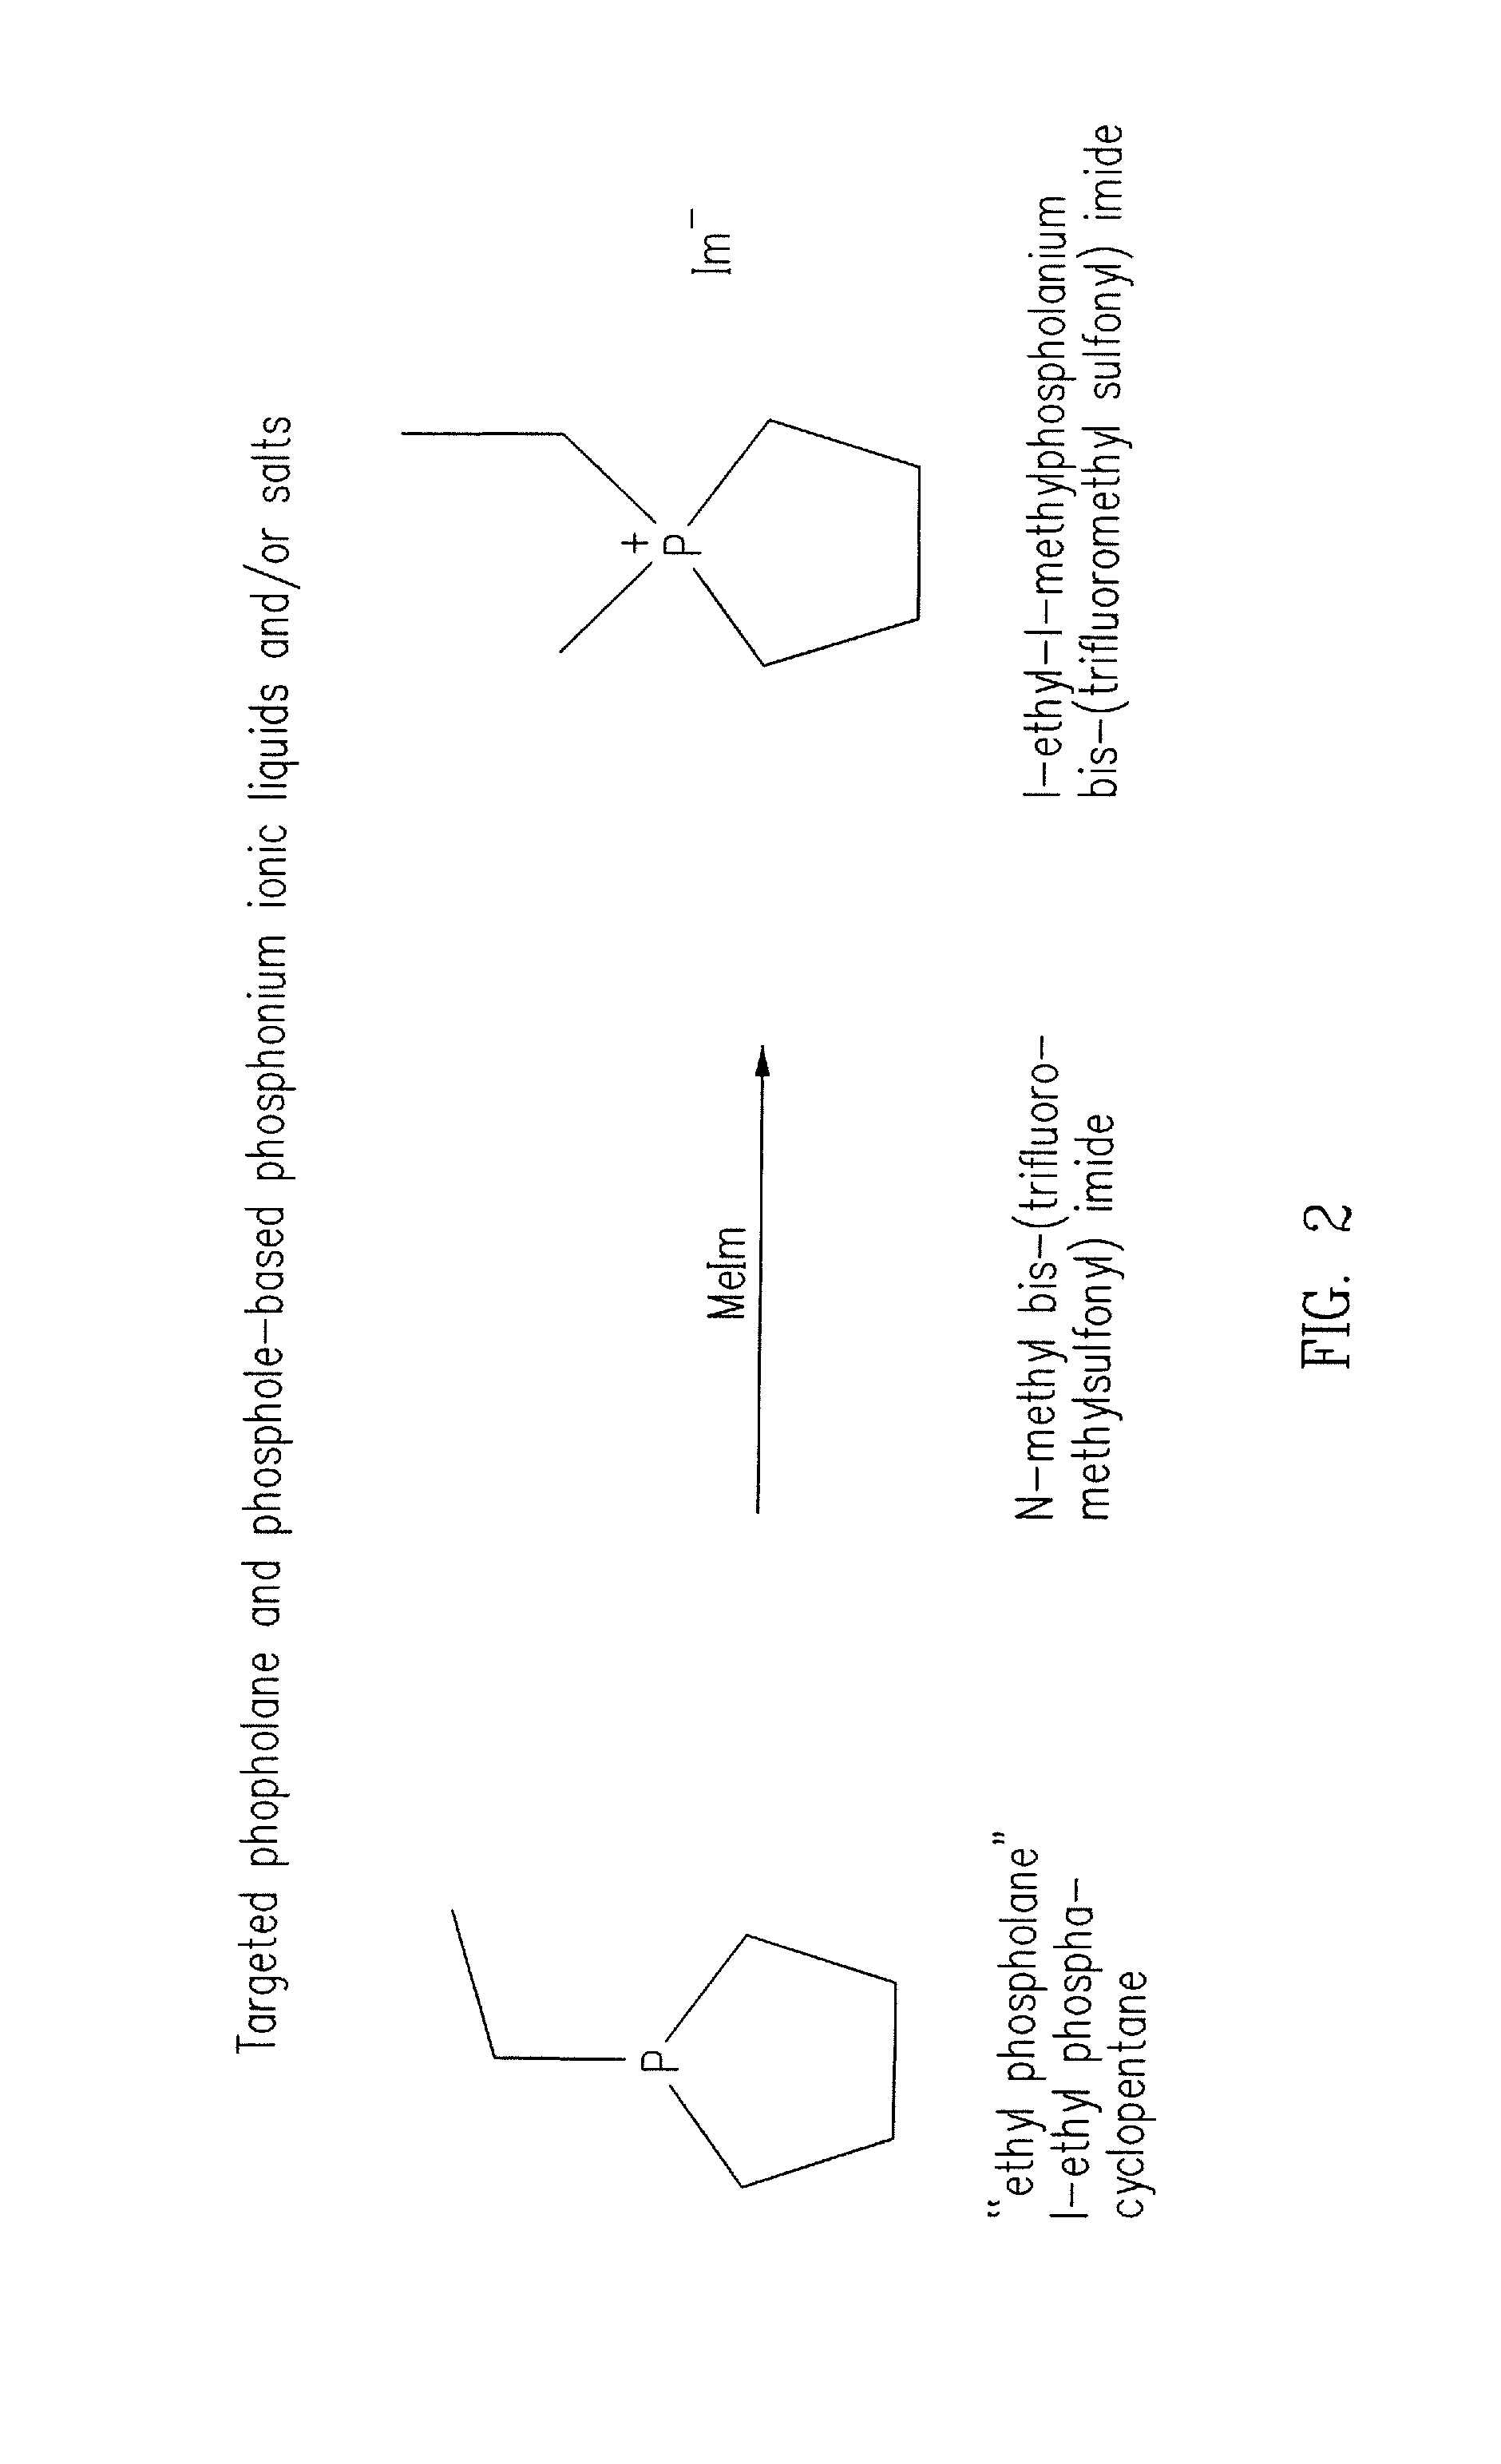 Phosphonium Ionic Liquids, Compositions, Methods of Making and Batteries Formed There From